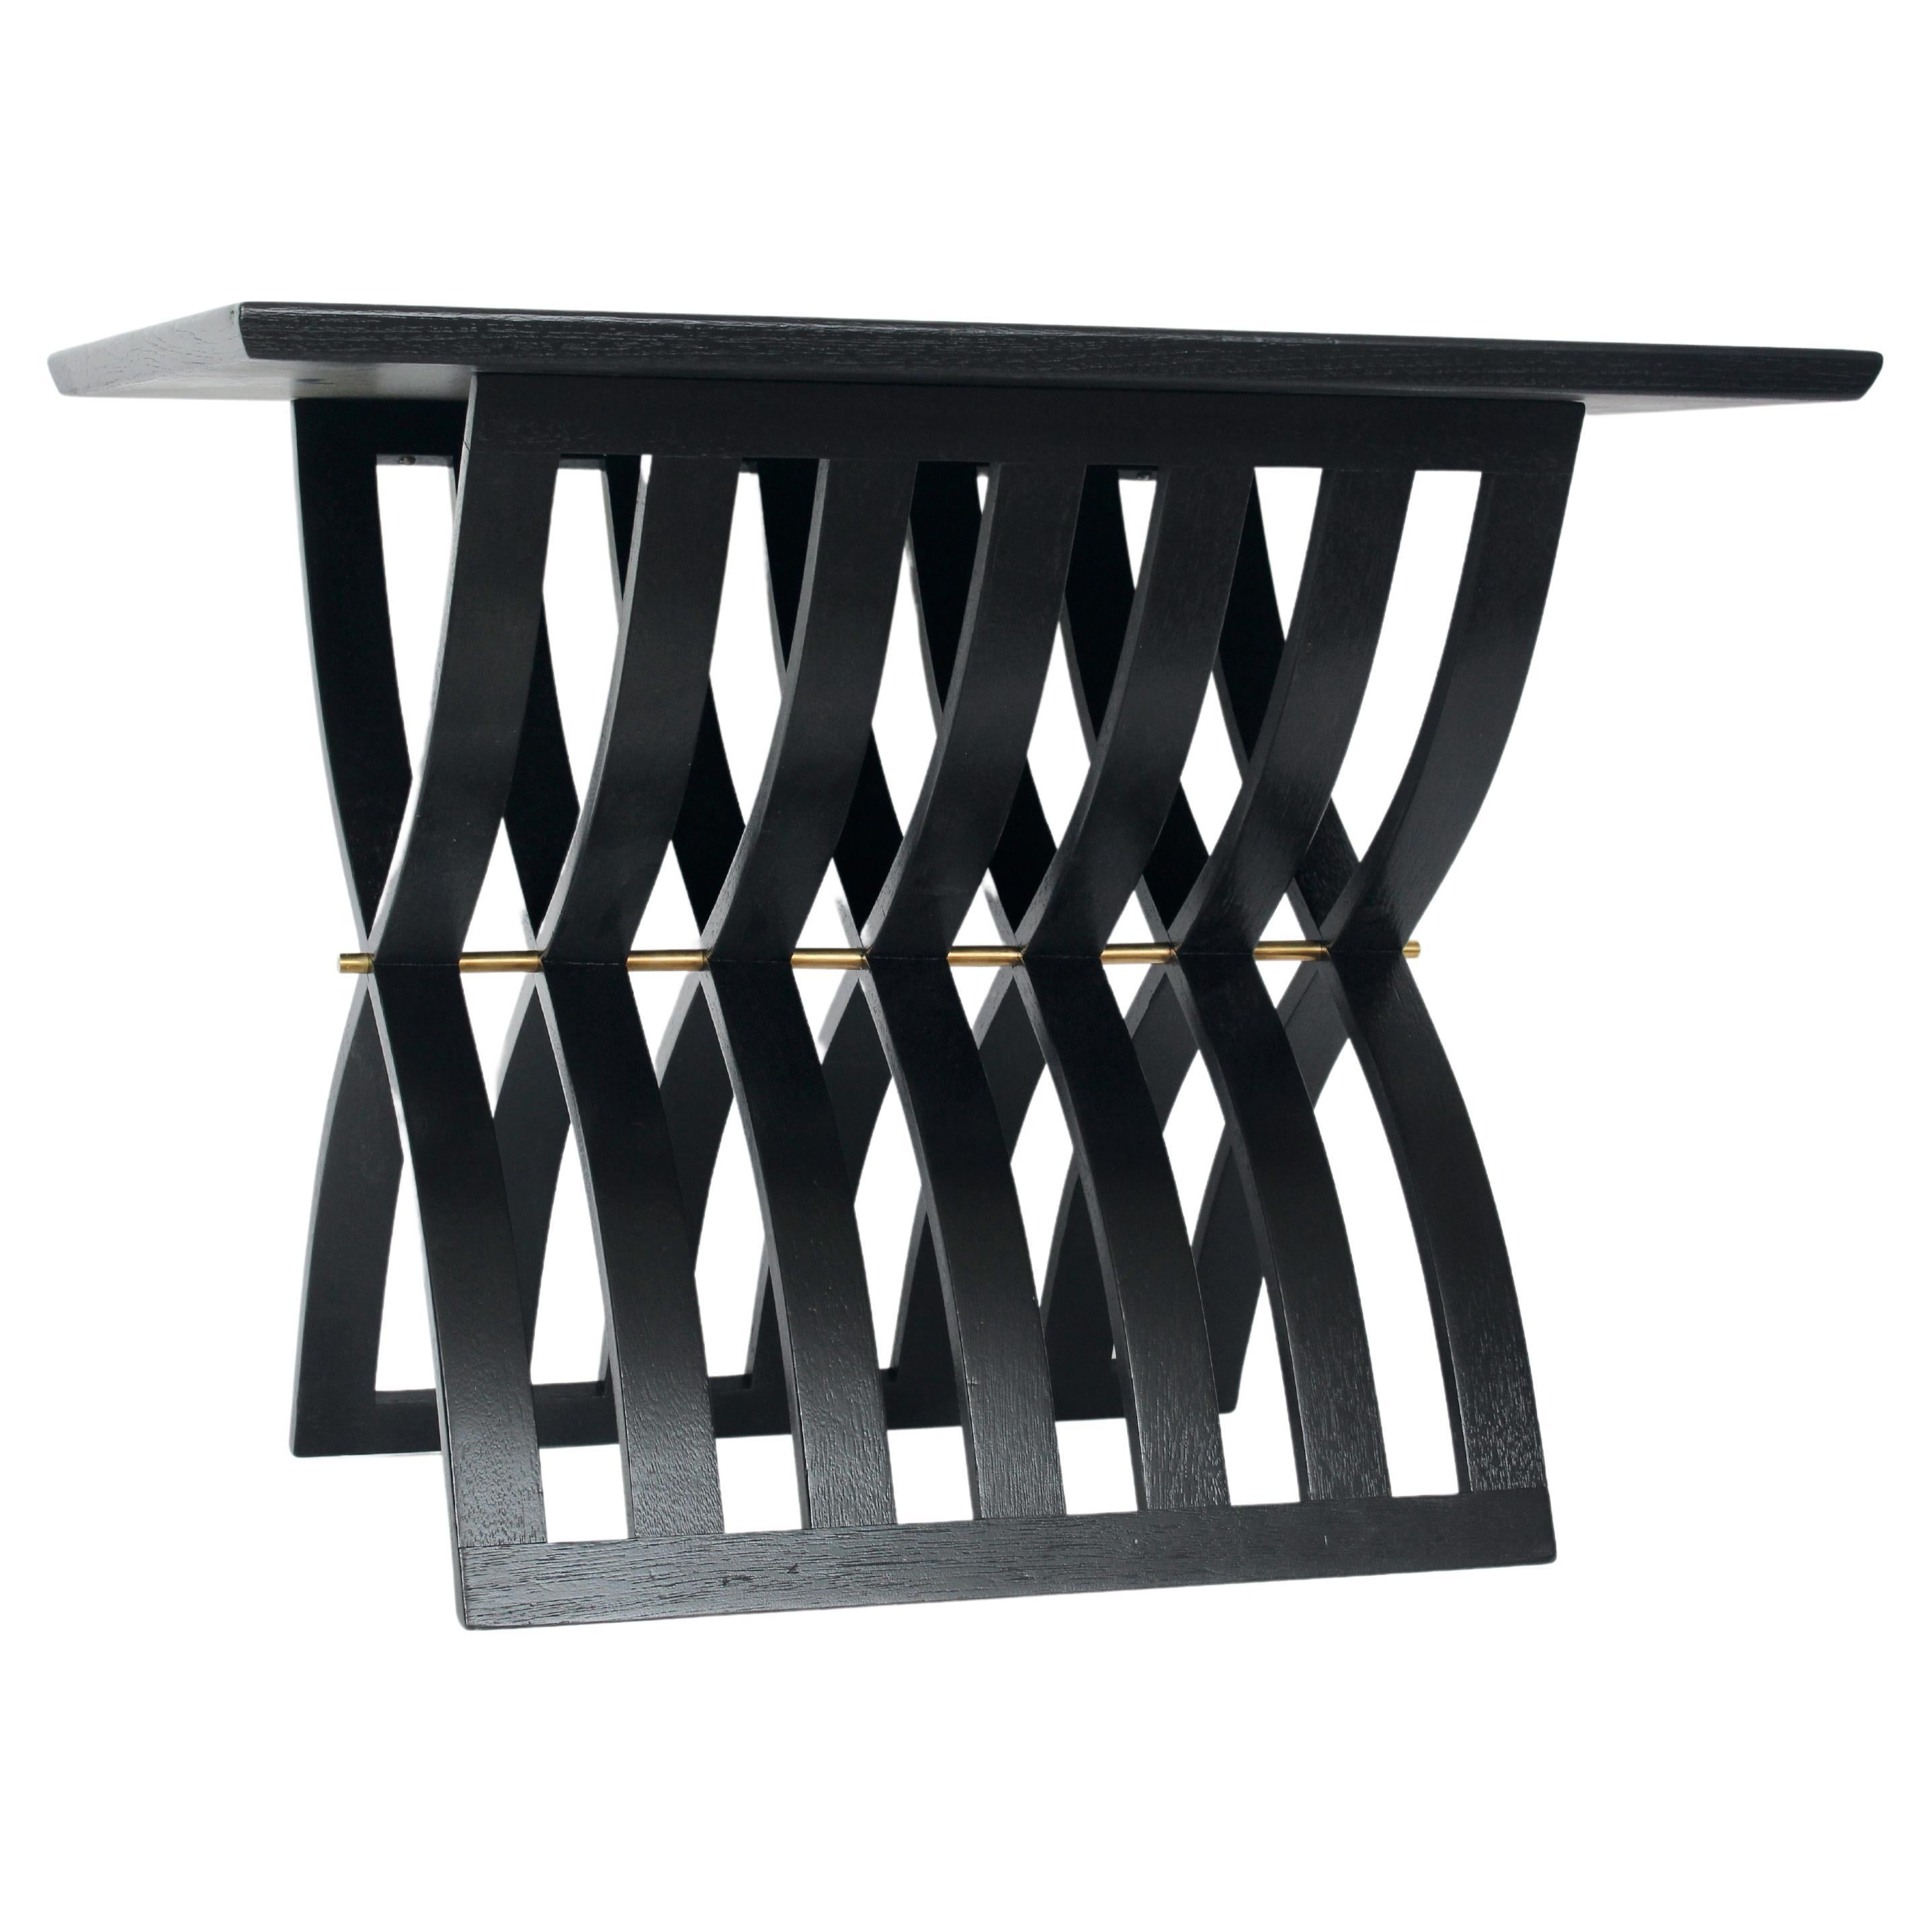 Sculptural Harvey Probber Black Enameled Model 1216 Rectangular End Table.  Featuring a Black enameled rectangular beveled Teak surface, steam bent Mahogany curved slat x base with solid Brass center rod support. Classic. American Mid-Century.